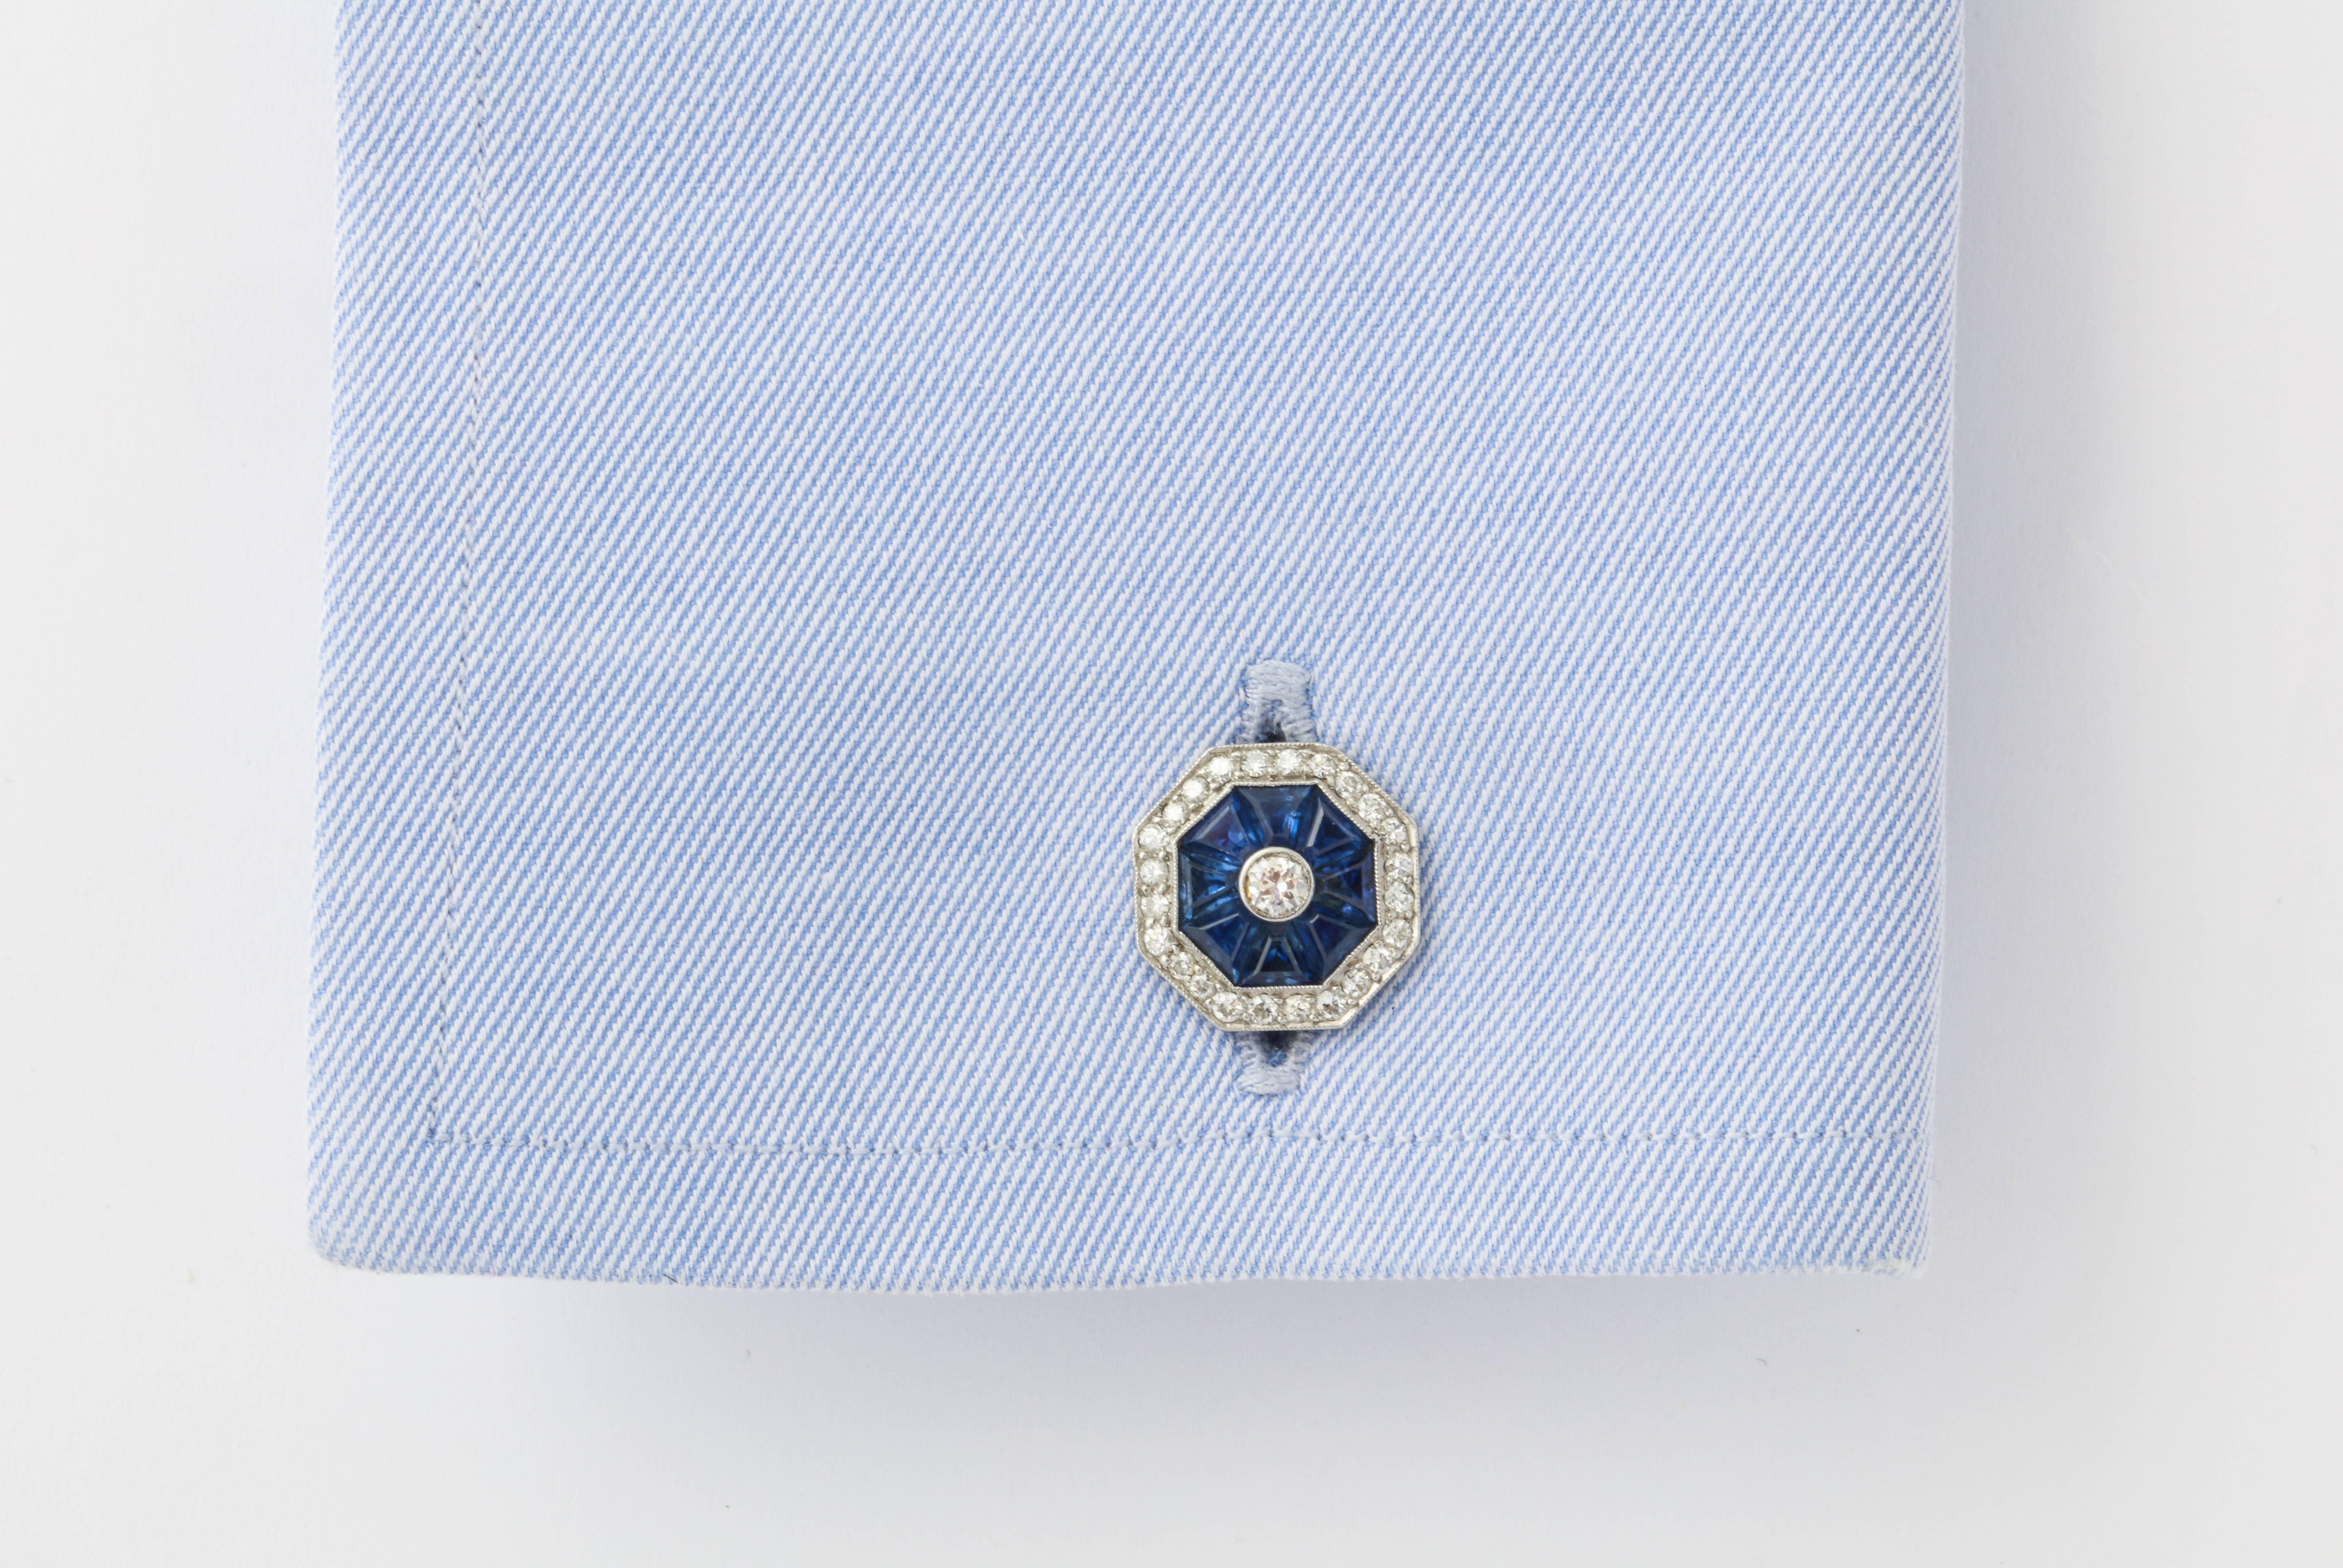 Art Deco cufflinks are always incredibly chic, and a great vintage pair is also very rare.  Perfectly exemplifying the period, these cufflinks feature custom cut blue sapphires which exquisitely surround the center diamond. The outer border of round